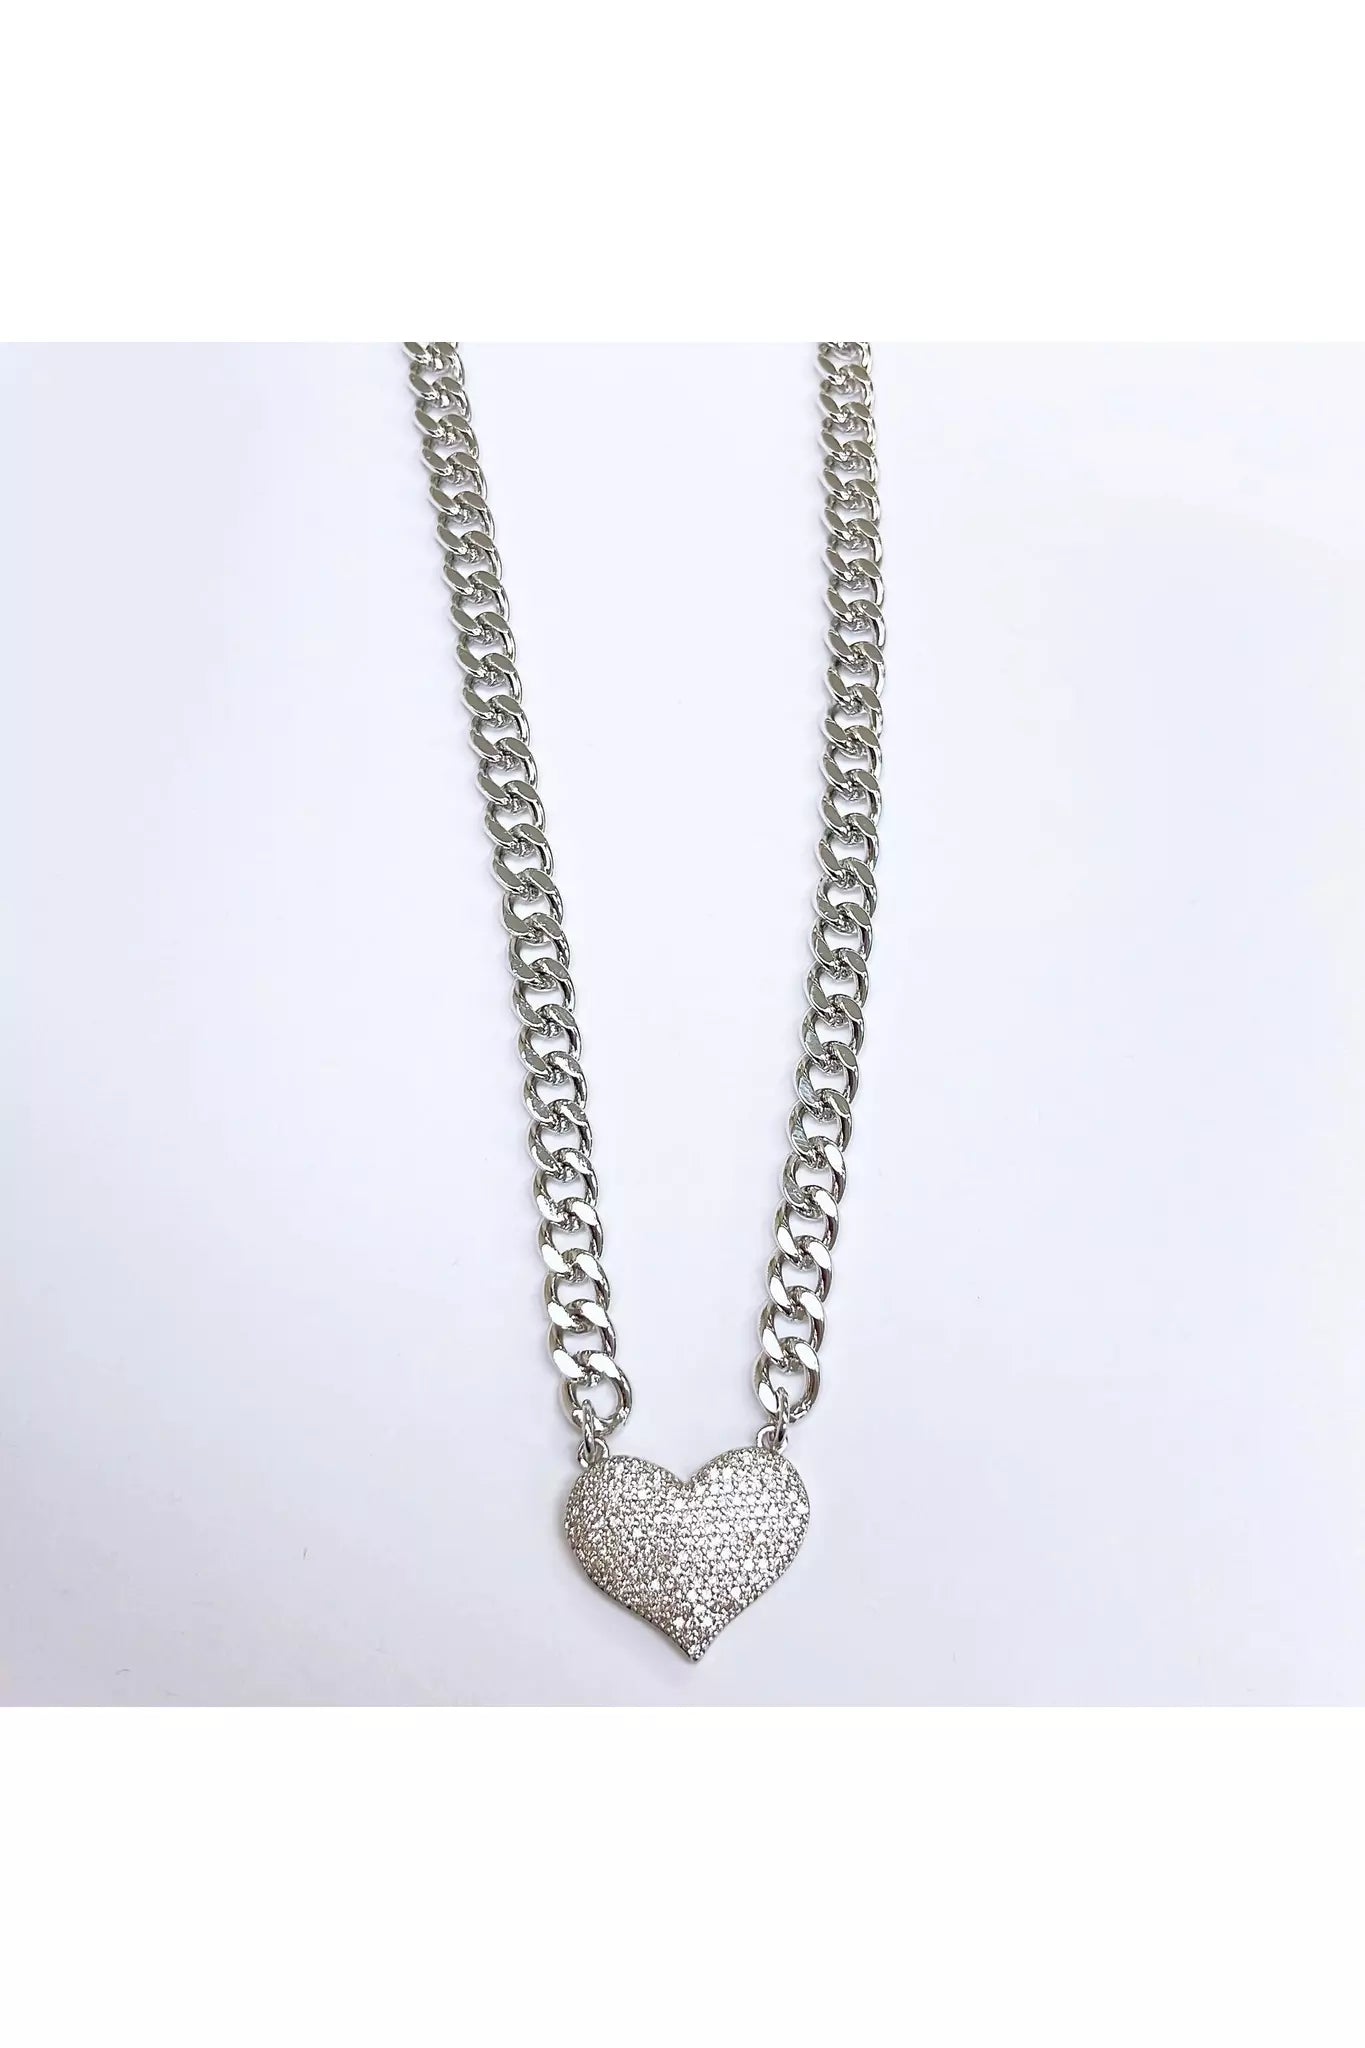 Treasure jewels evelyn heart necklace